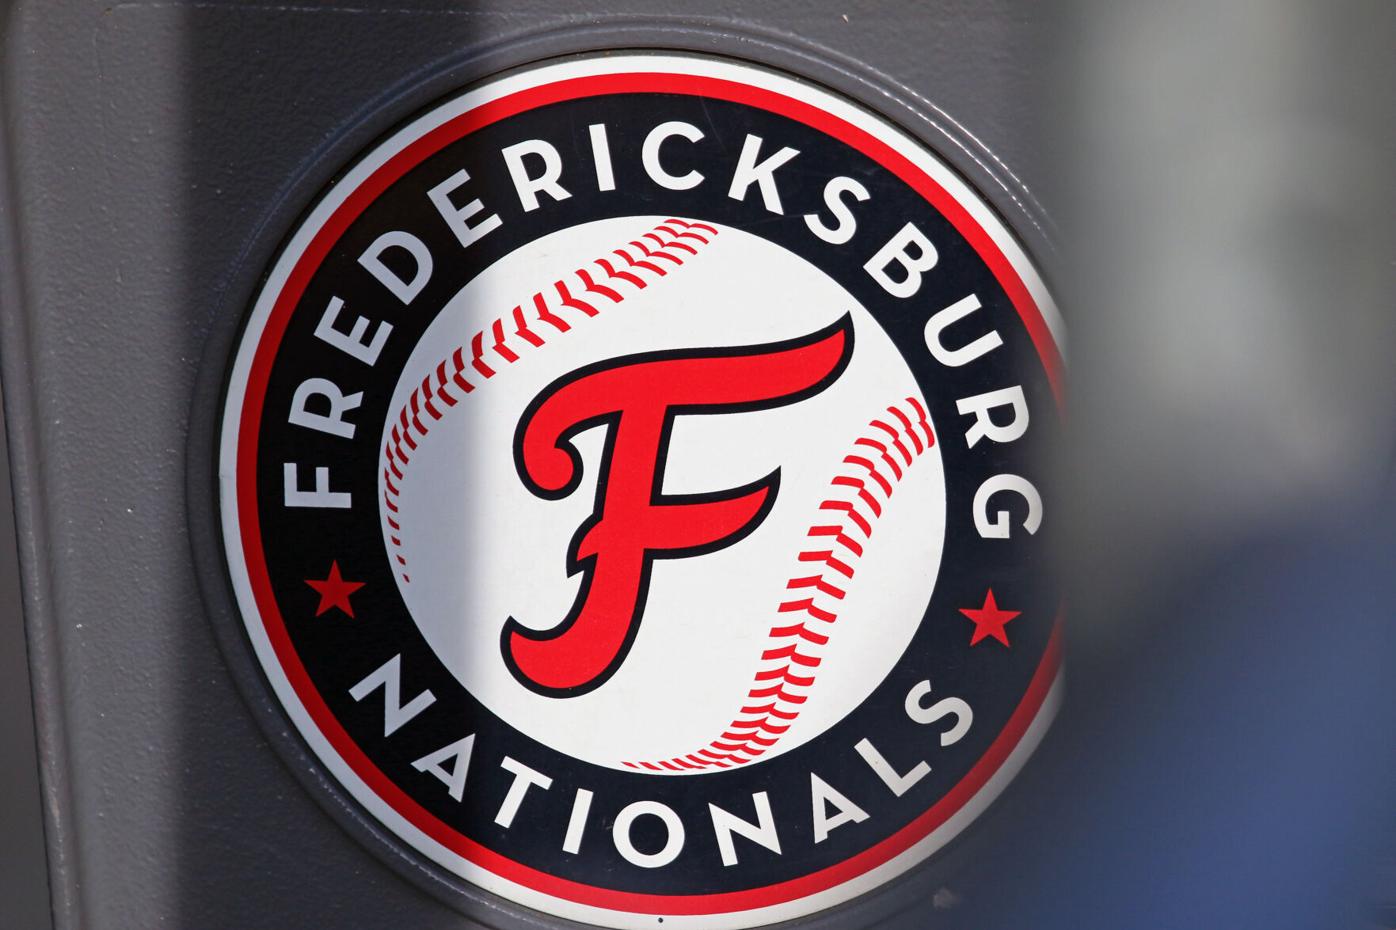 Potomac Nationals finalize deal for new stadium in Fredericksburg, News